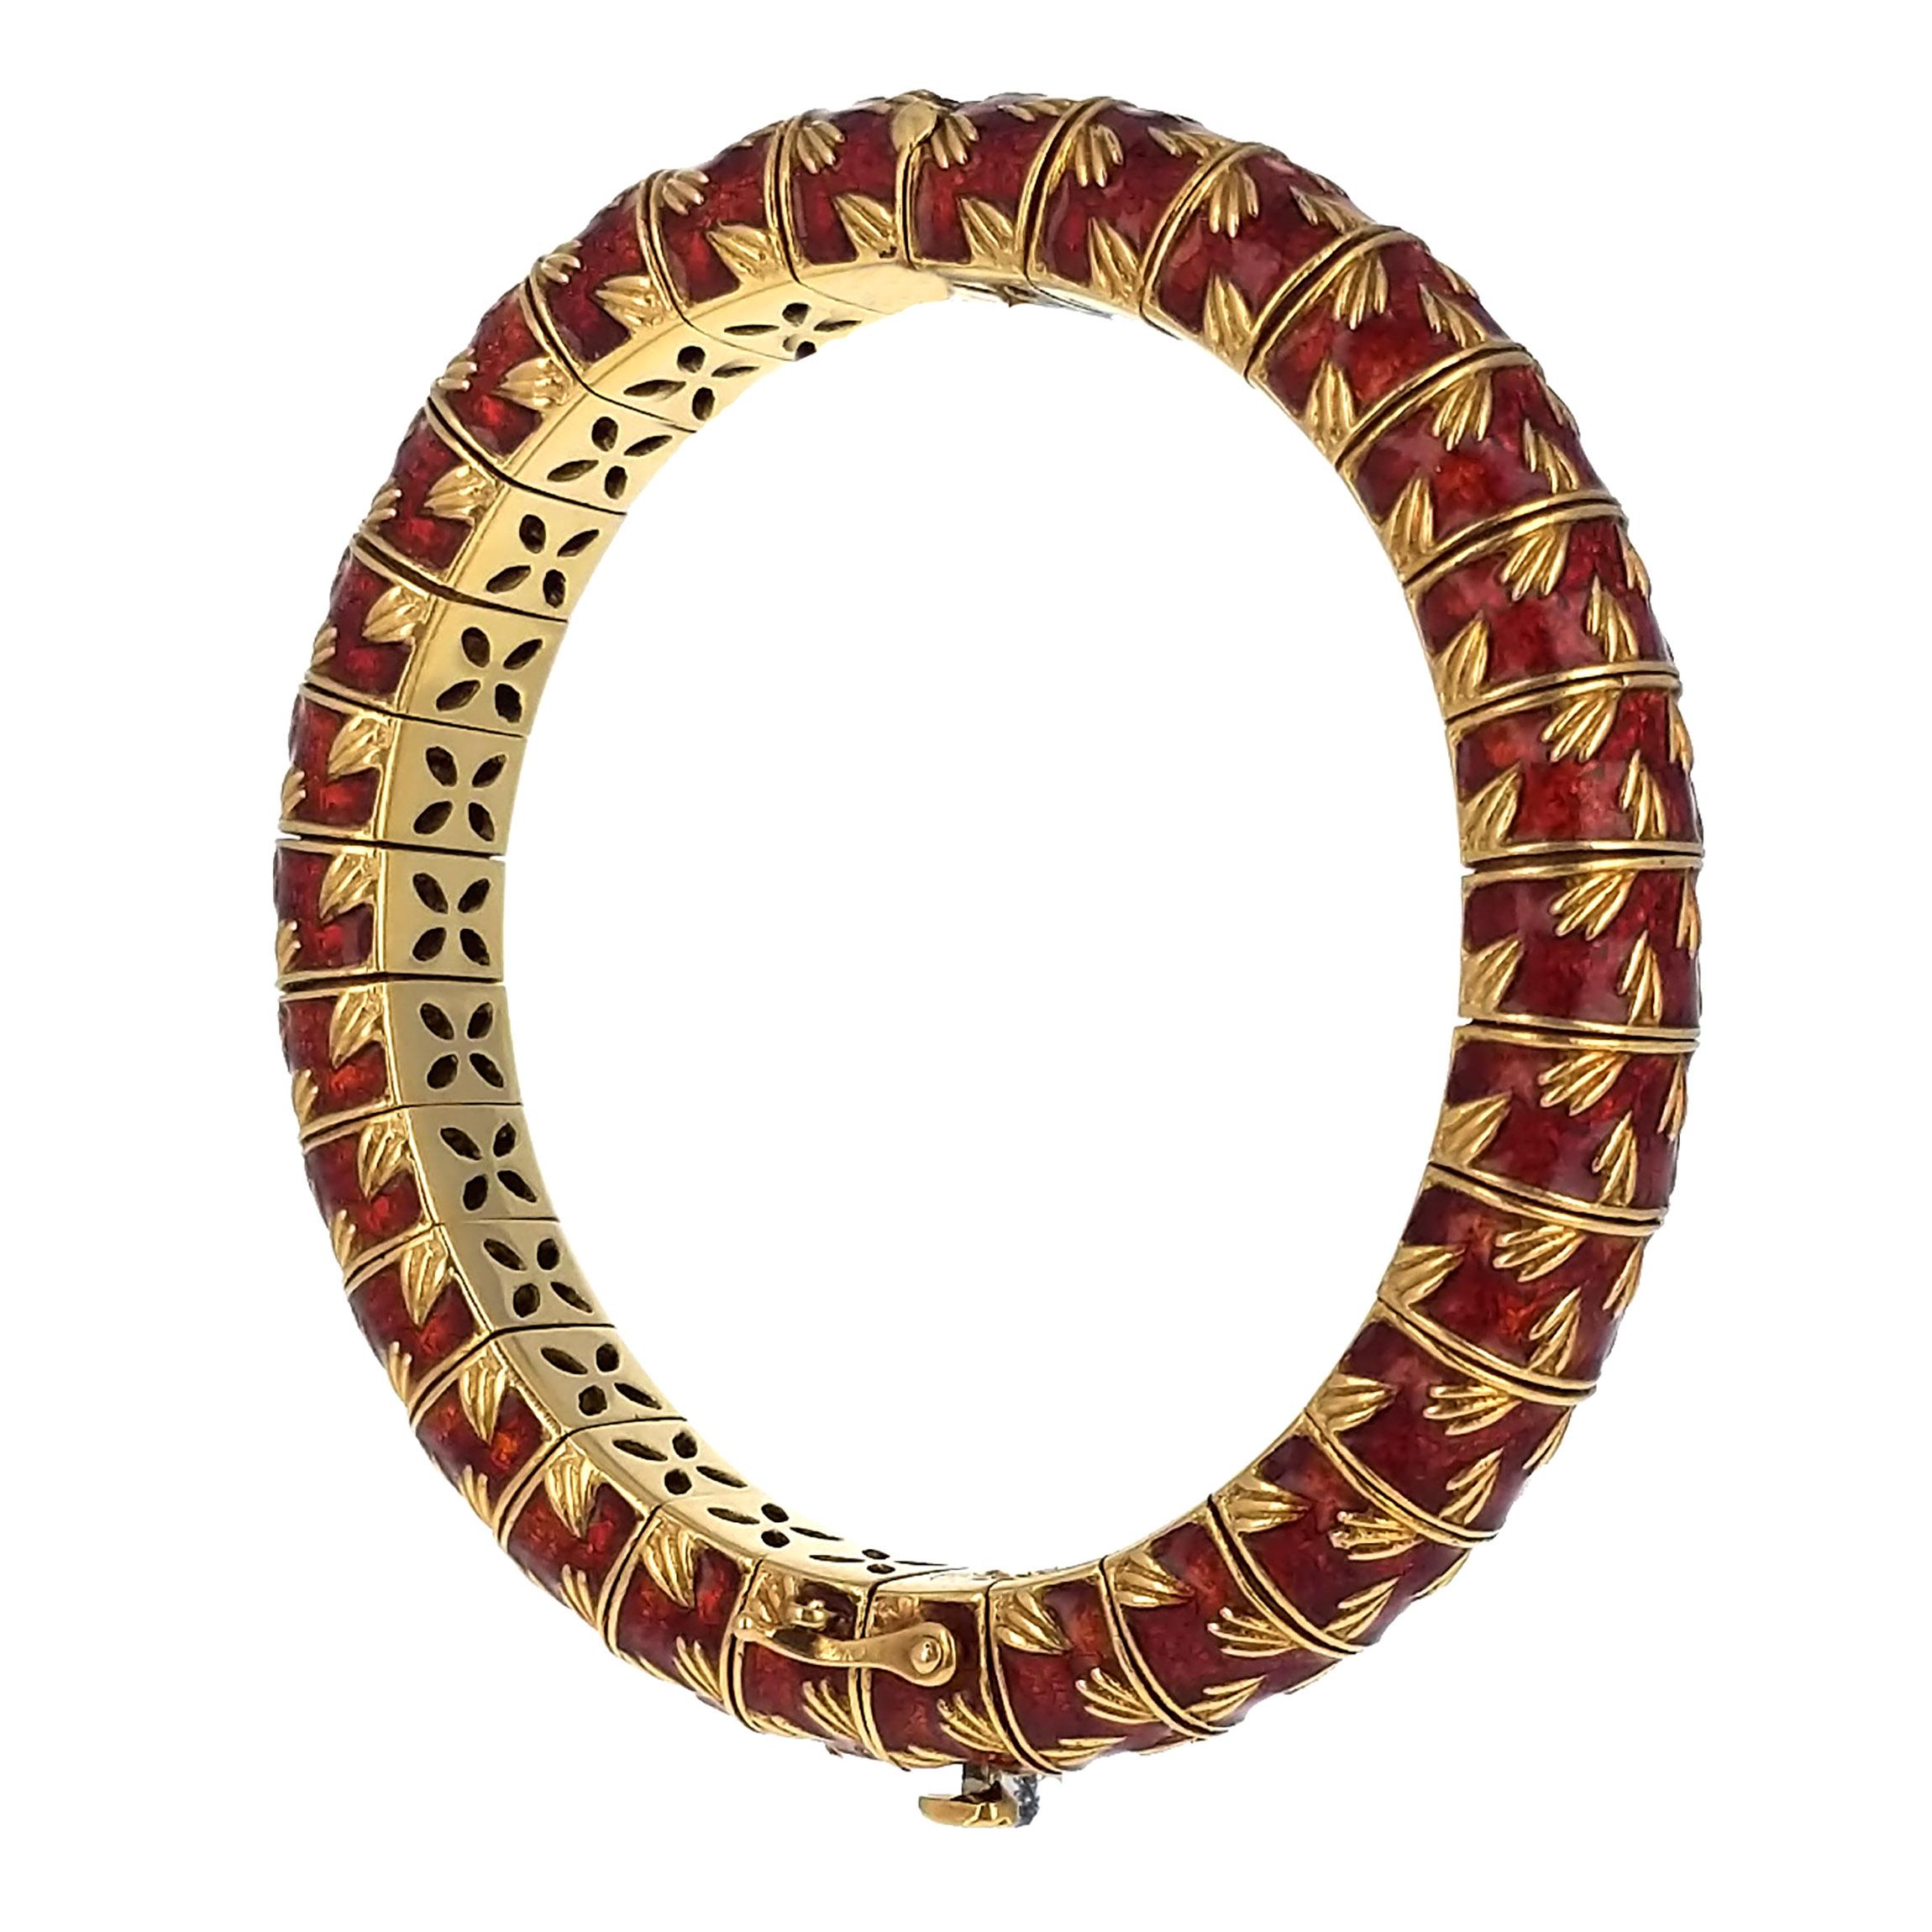 This articulated bangle bracelet features burnt orange paillonné enamel and embossed leaf motif accents. It is mounted in 18 karat yellow gold and stamped Model FC Depose. It was made in Italy, circa late 1960s. It is 5.5 cm in diameter.
